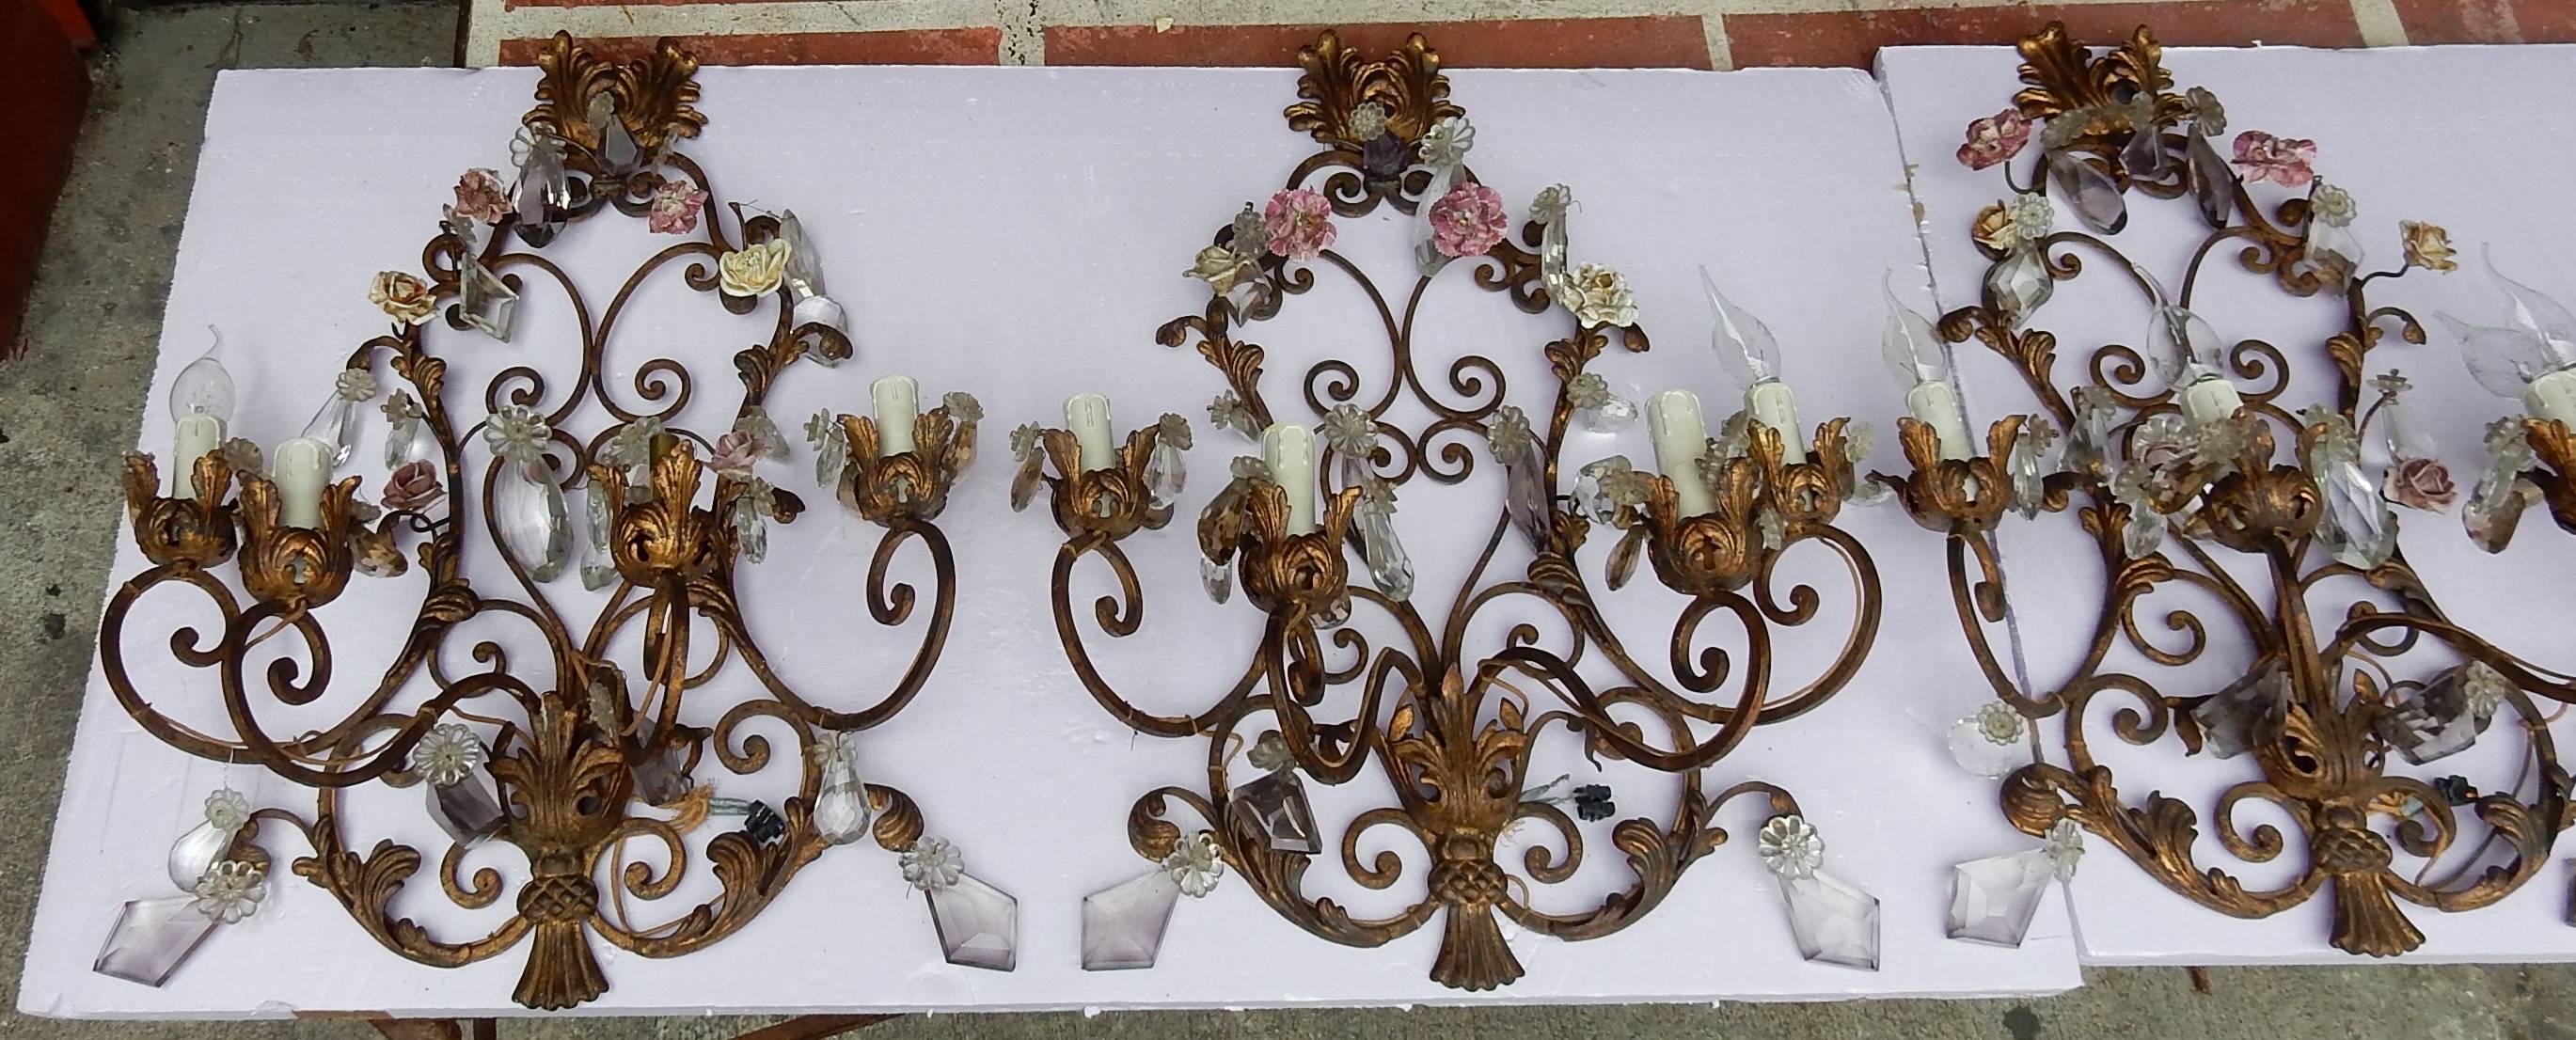 Napoleon III 1900 Series of Four Wall Lamps Has Four Arms of Light N3 with Ceramic Flowers